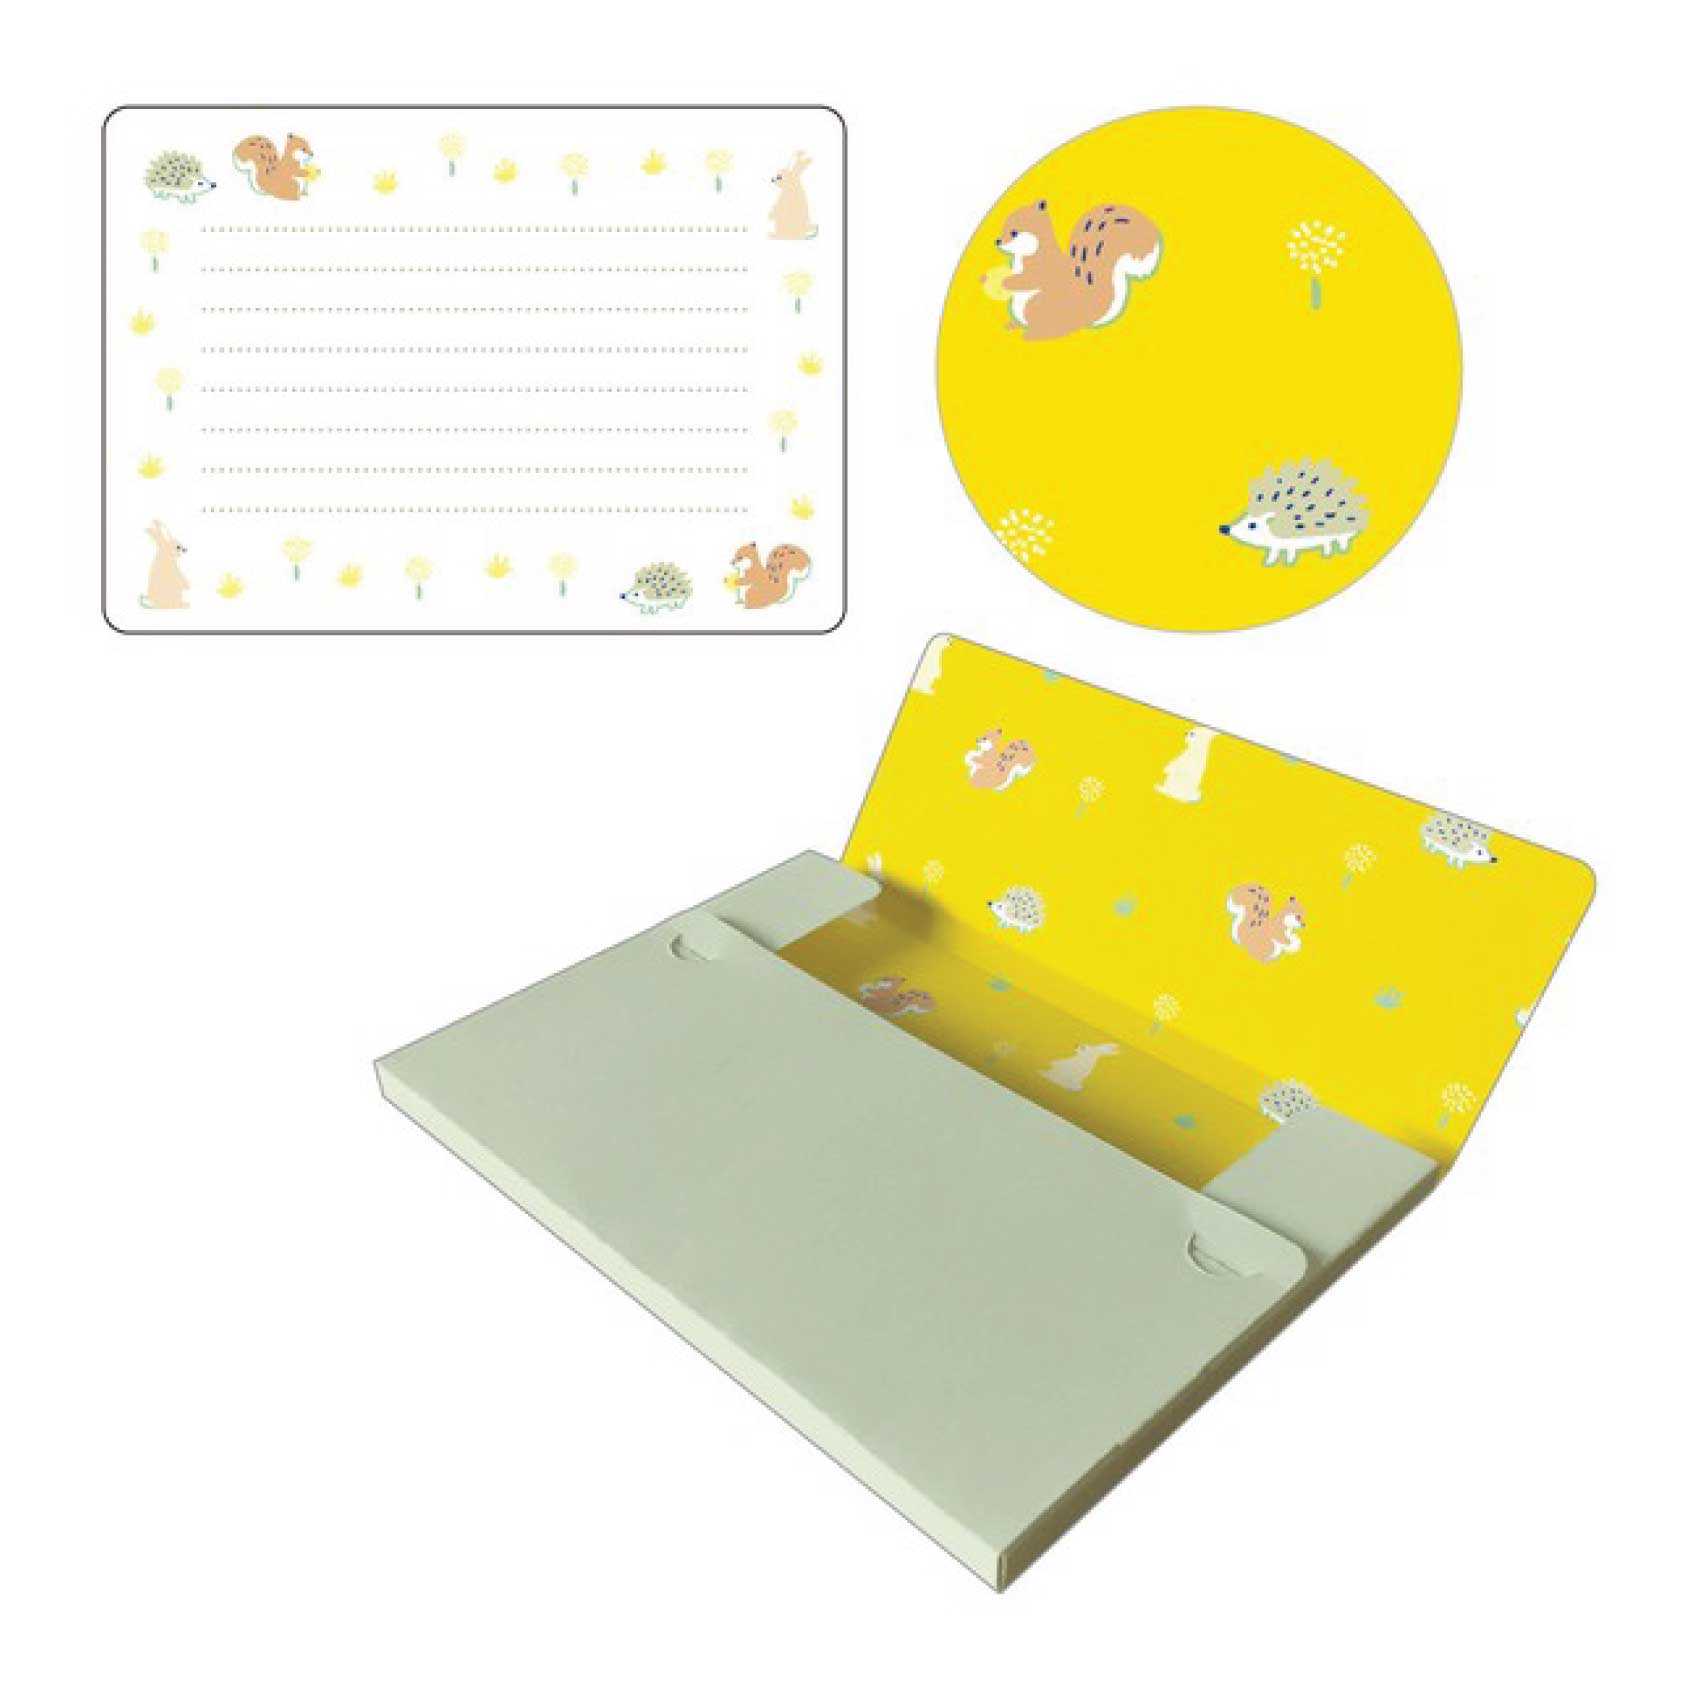 Squirrel Hedgehog Woodland Yellow A6 Letter Writing Cards Sticker Tape and Carton australia cute animals